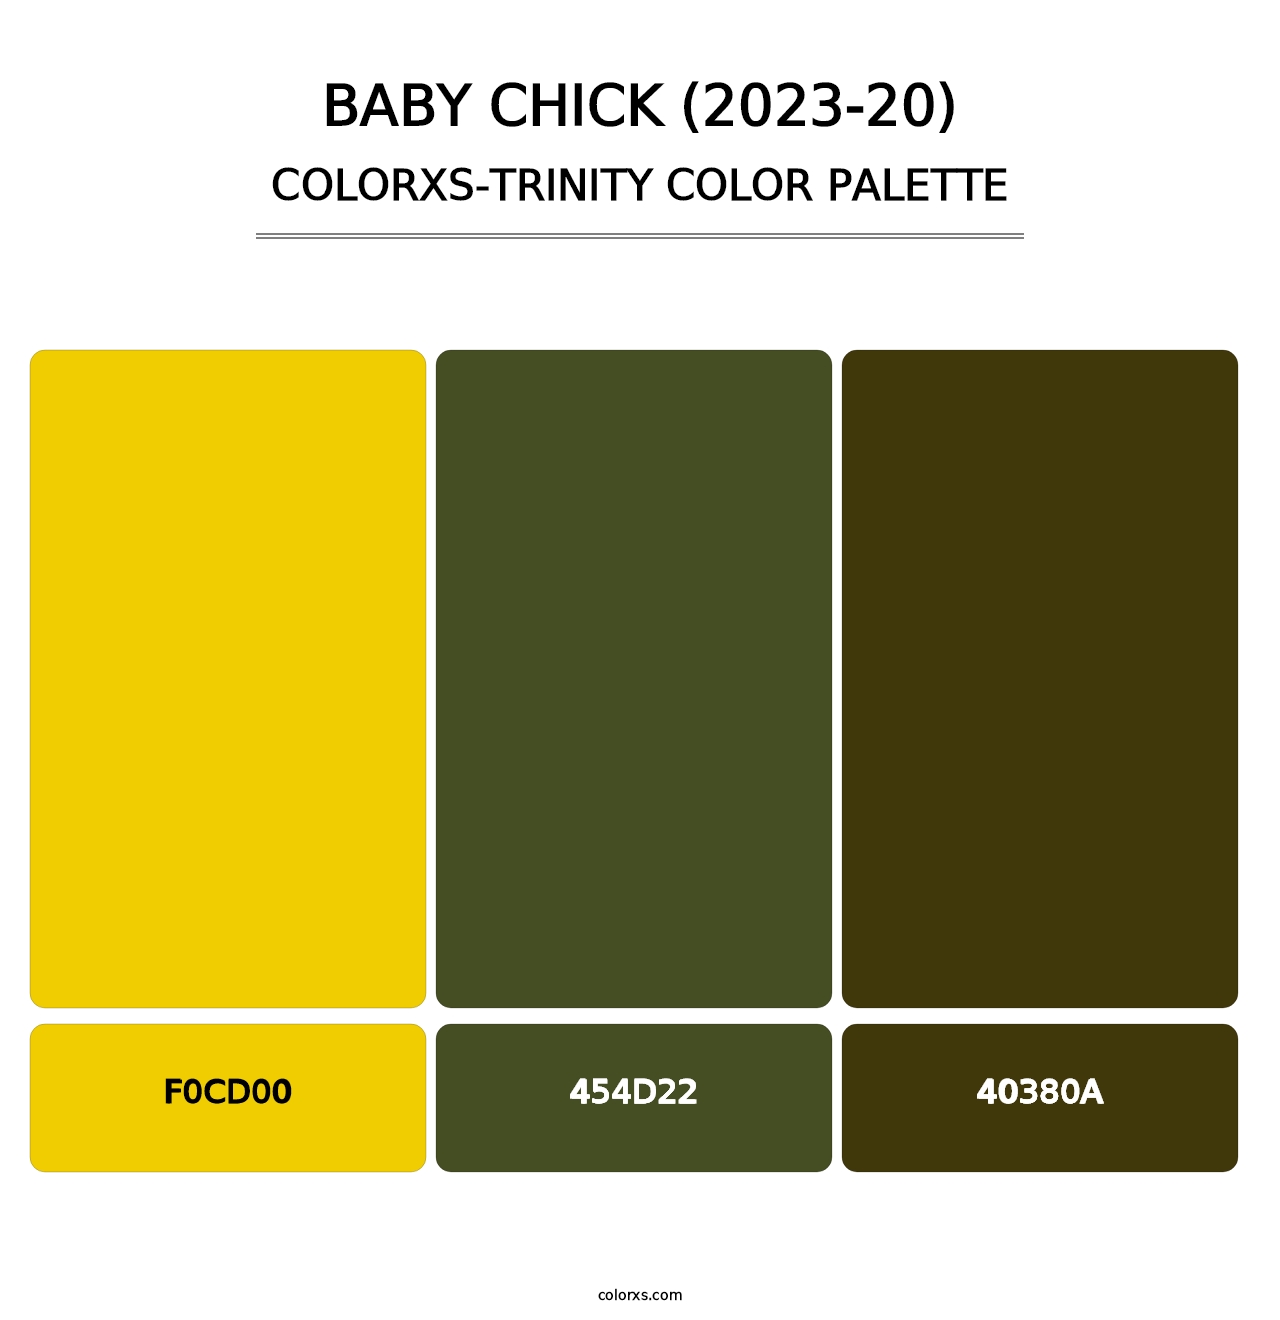 Baby Chick (2023-20) - Colorxs Trinity Palette